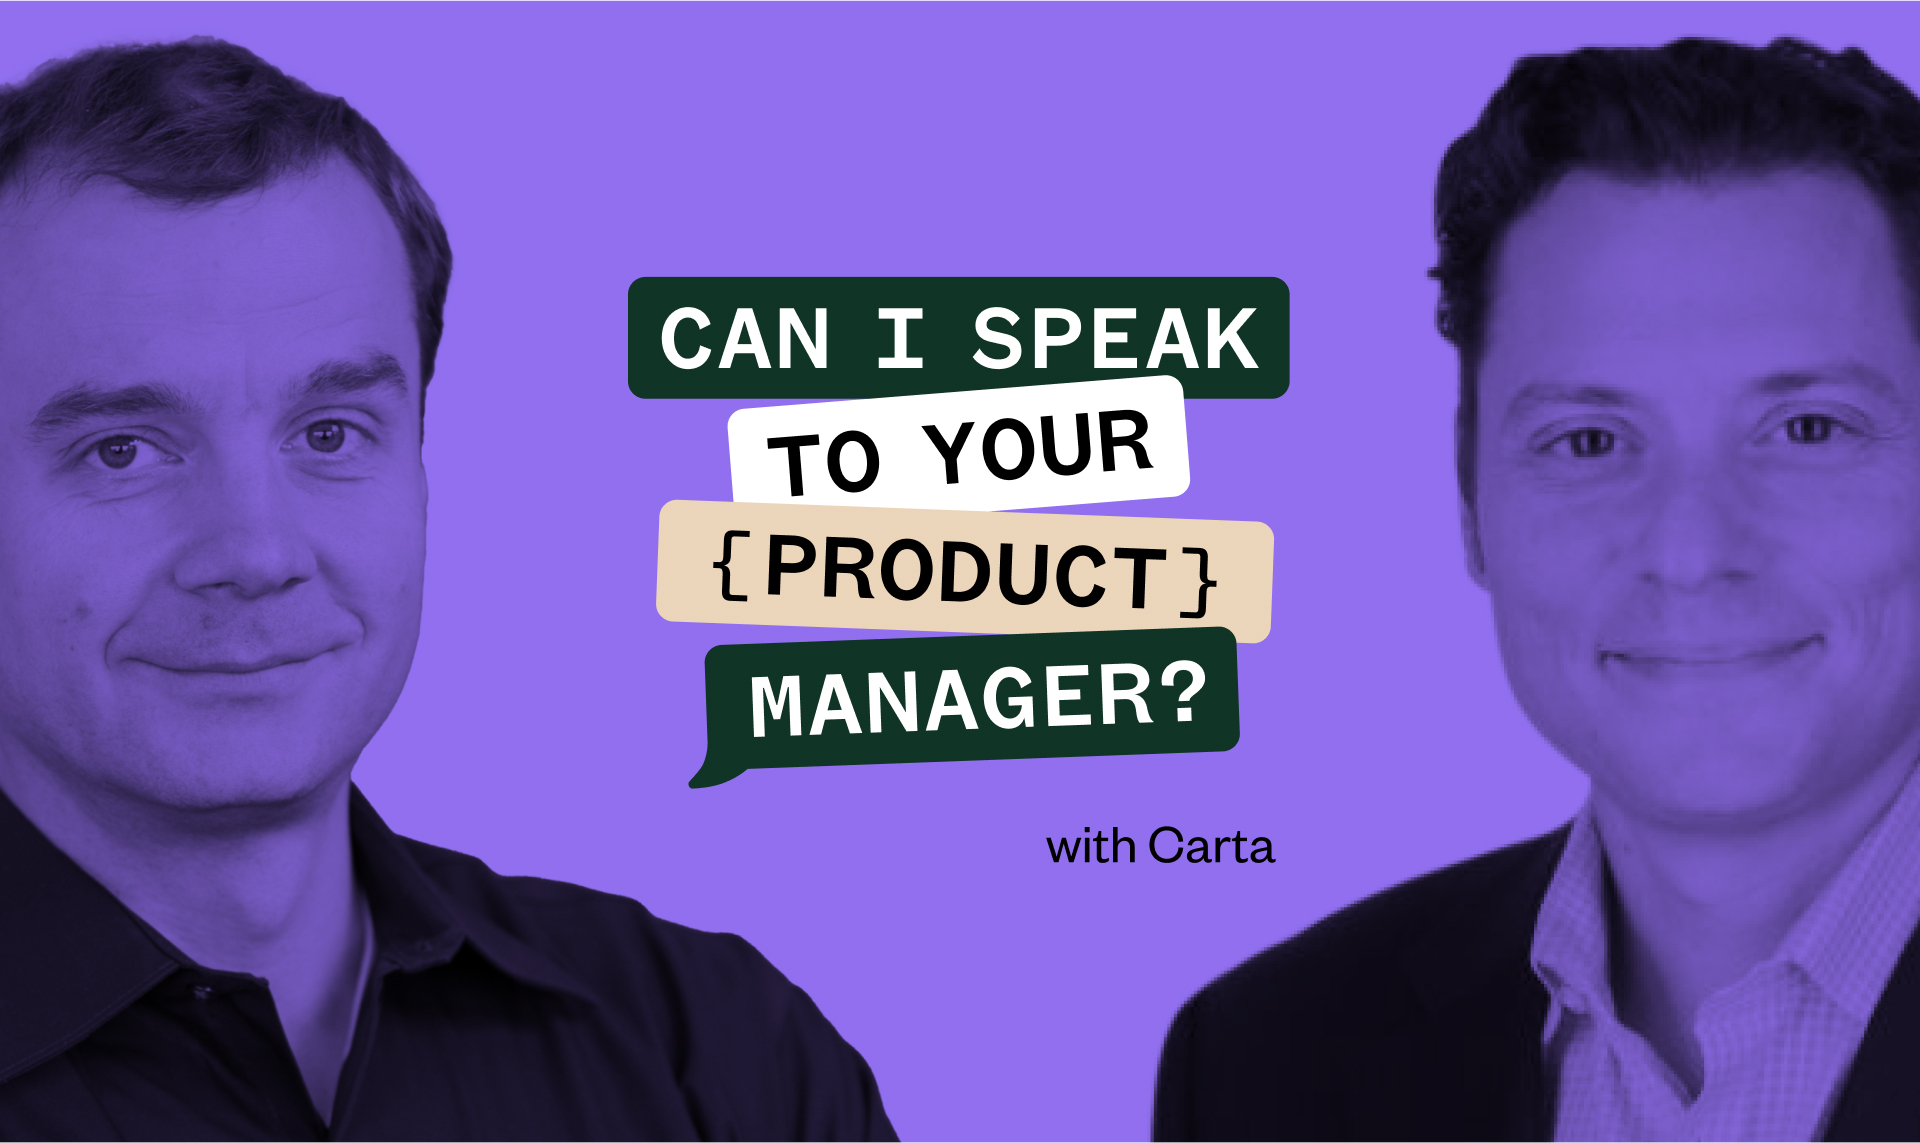 Two men in business attire are featured against a purple background with the text, "Can I Speak to Your {Product} Manager?" and "with Carta" displayed between them.